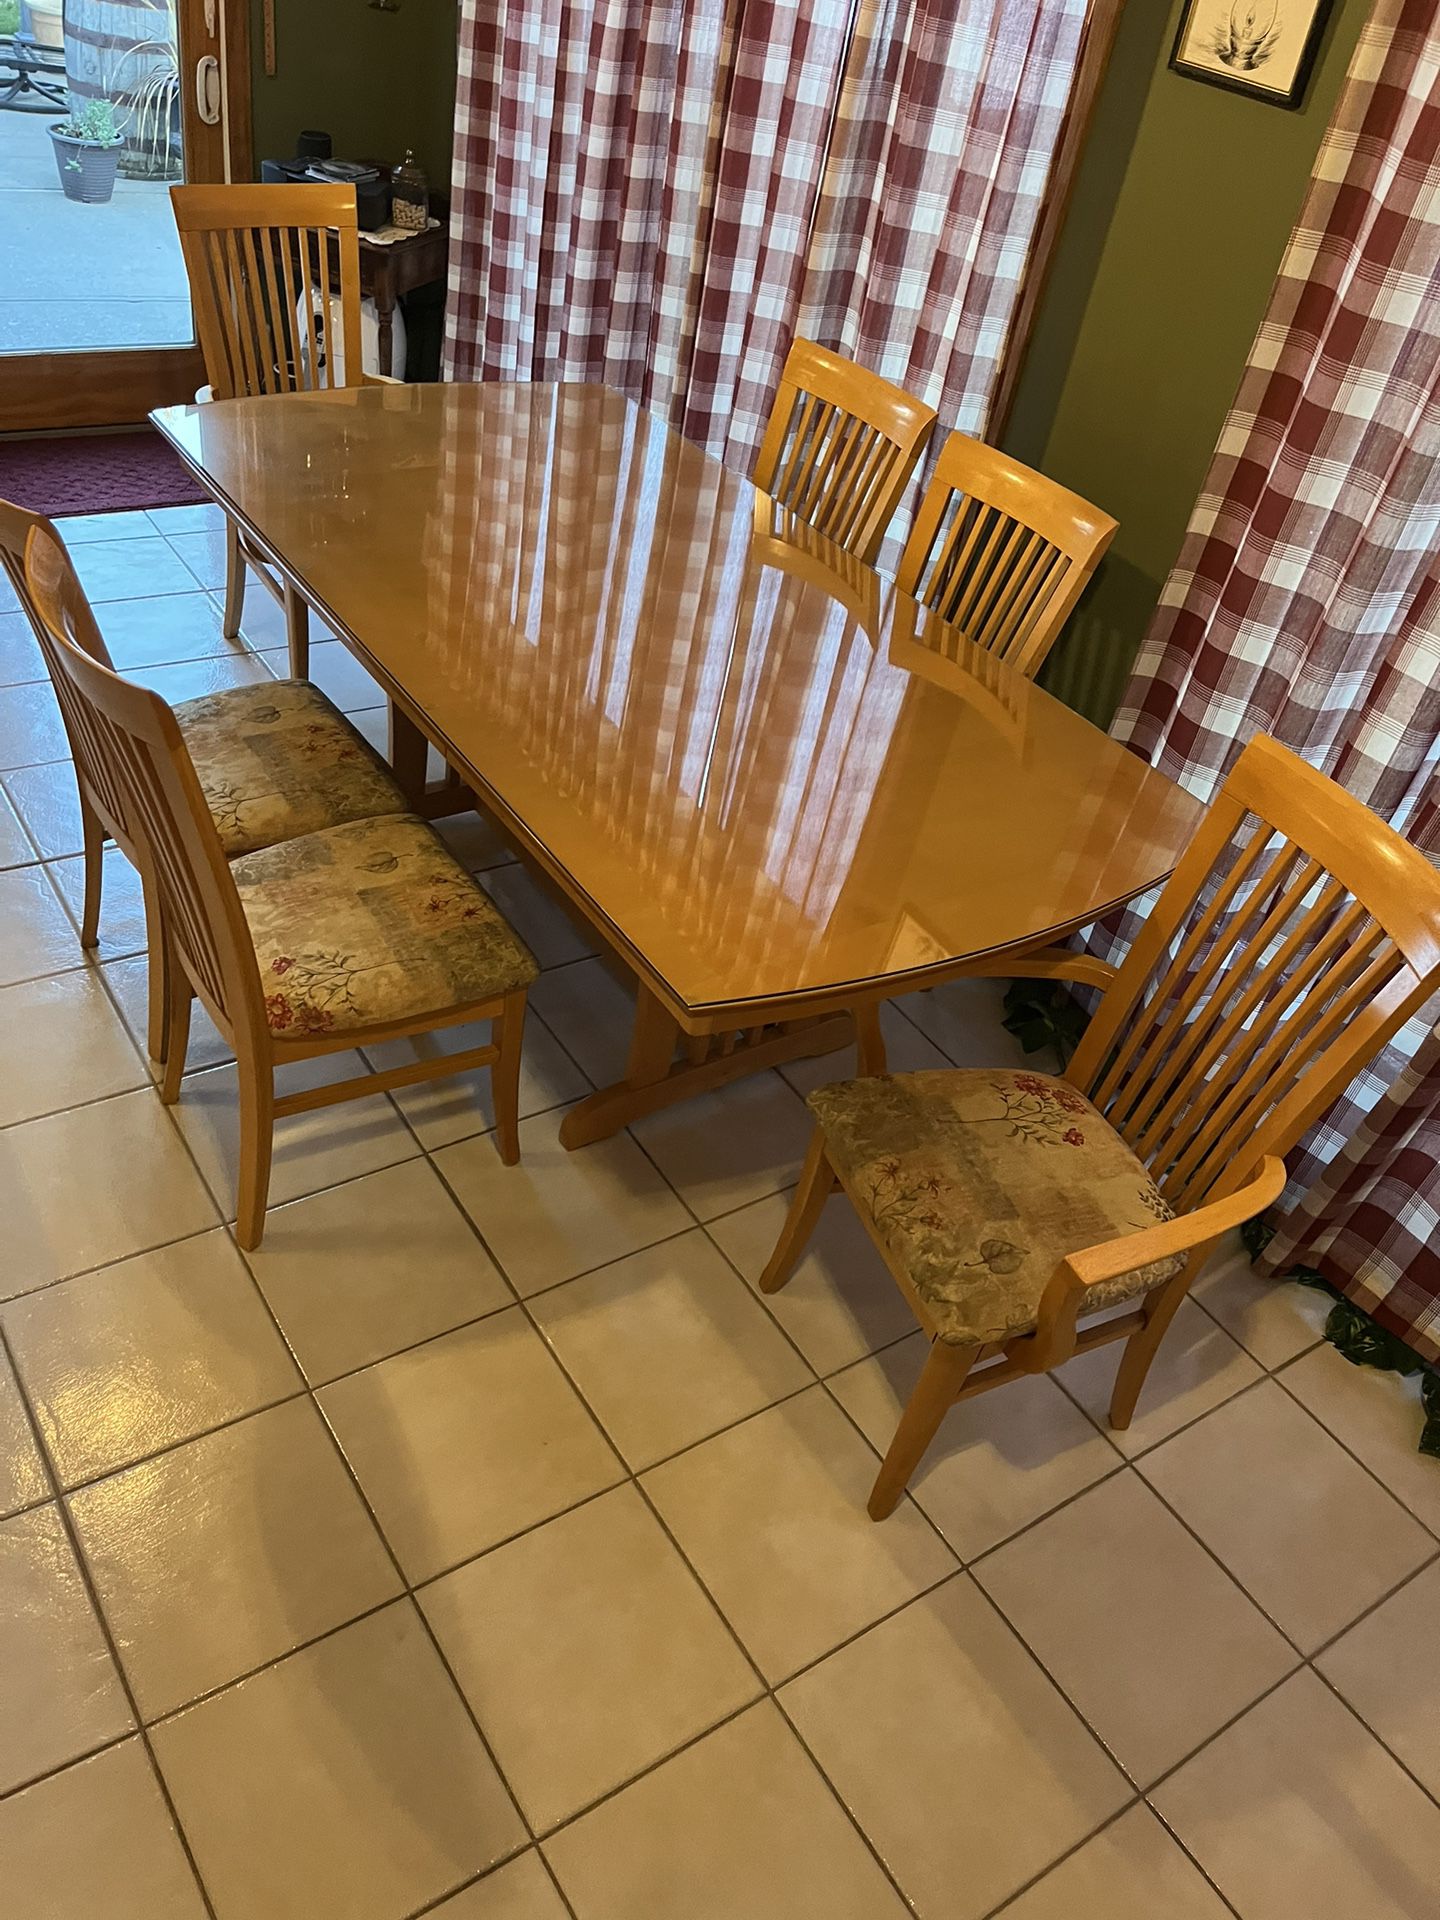 Dining Room Or Kitchen Table 